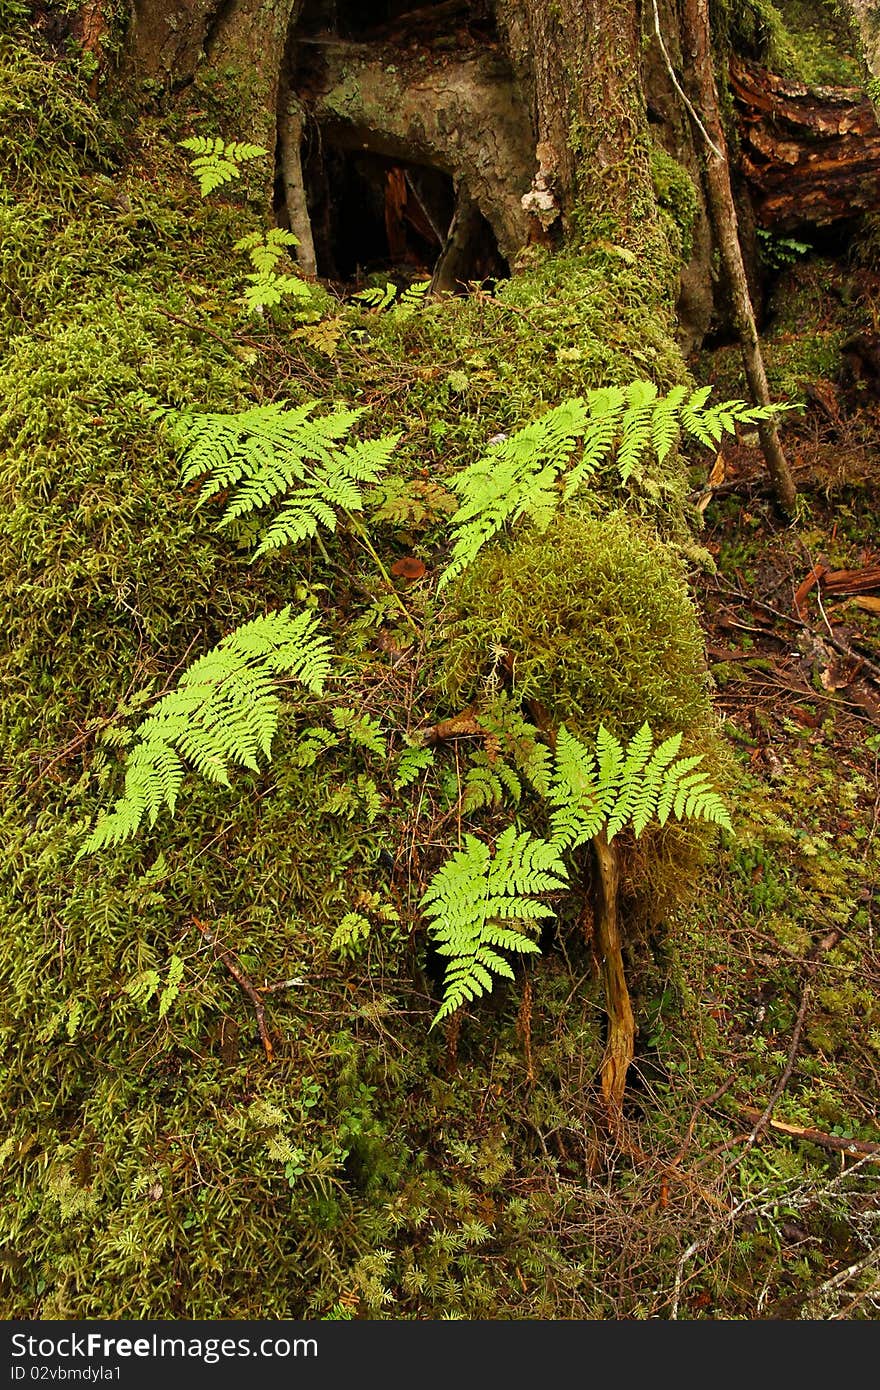 Ferns in temperate rainforest, in the Tongass National Forest, Southeast Alaska